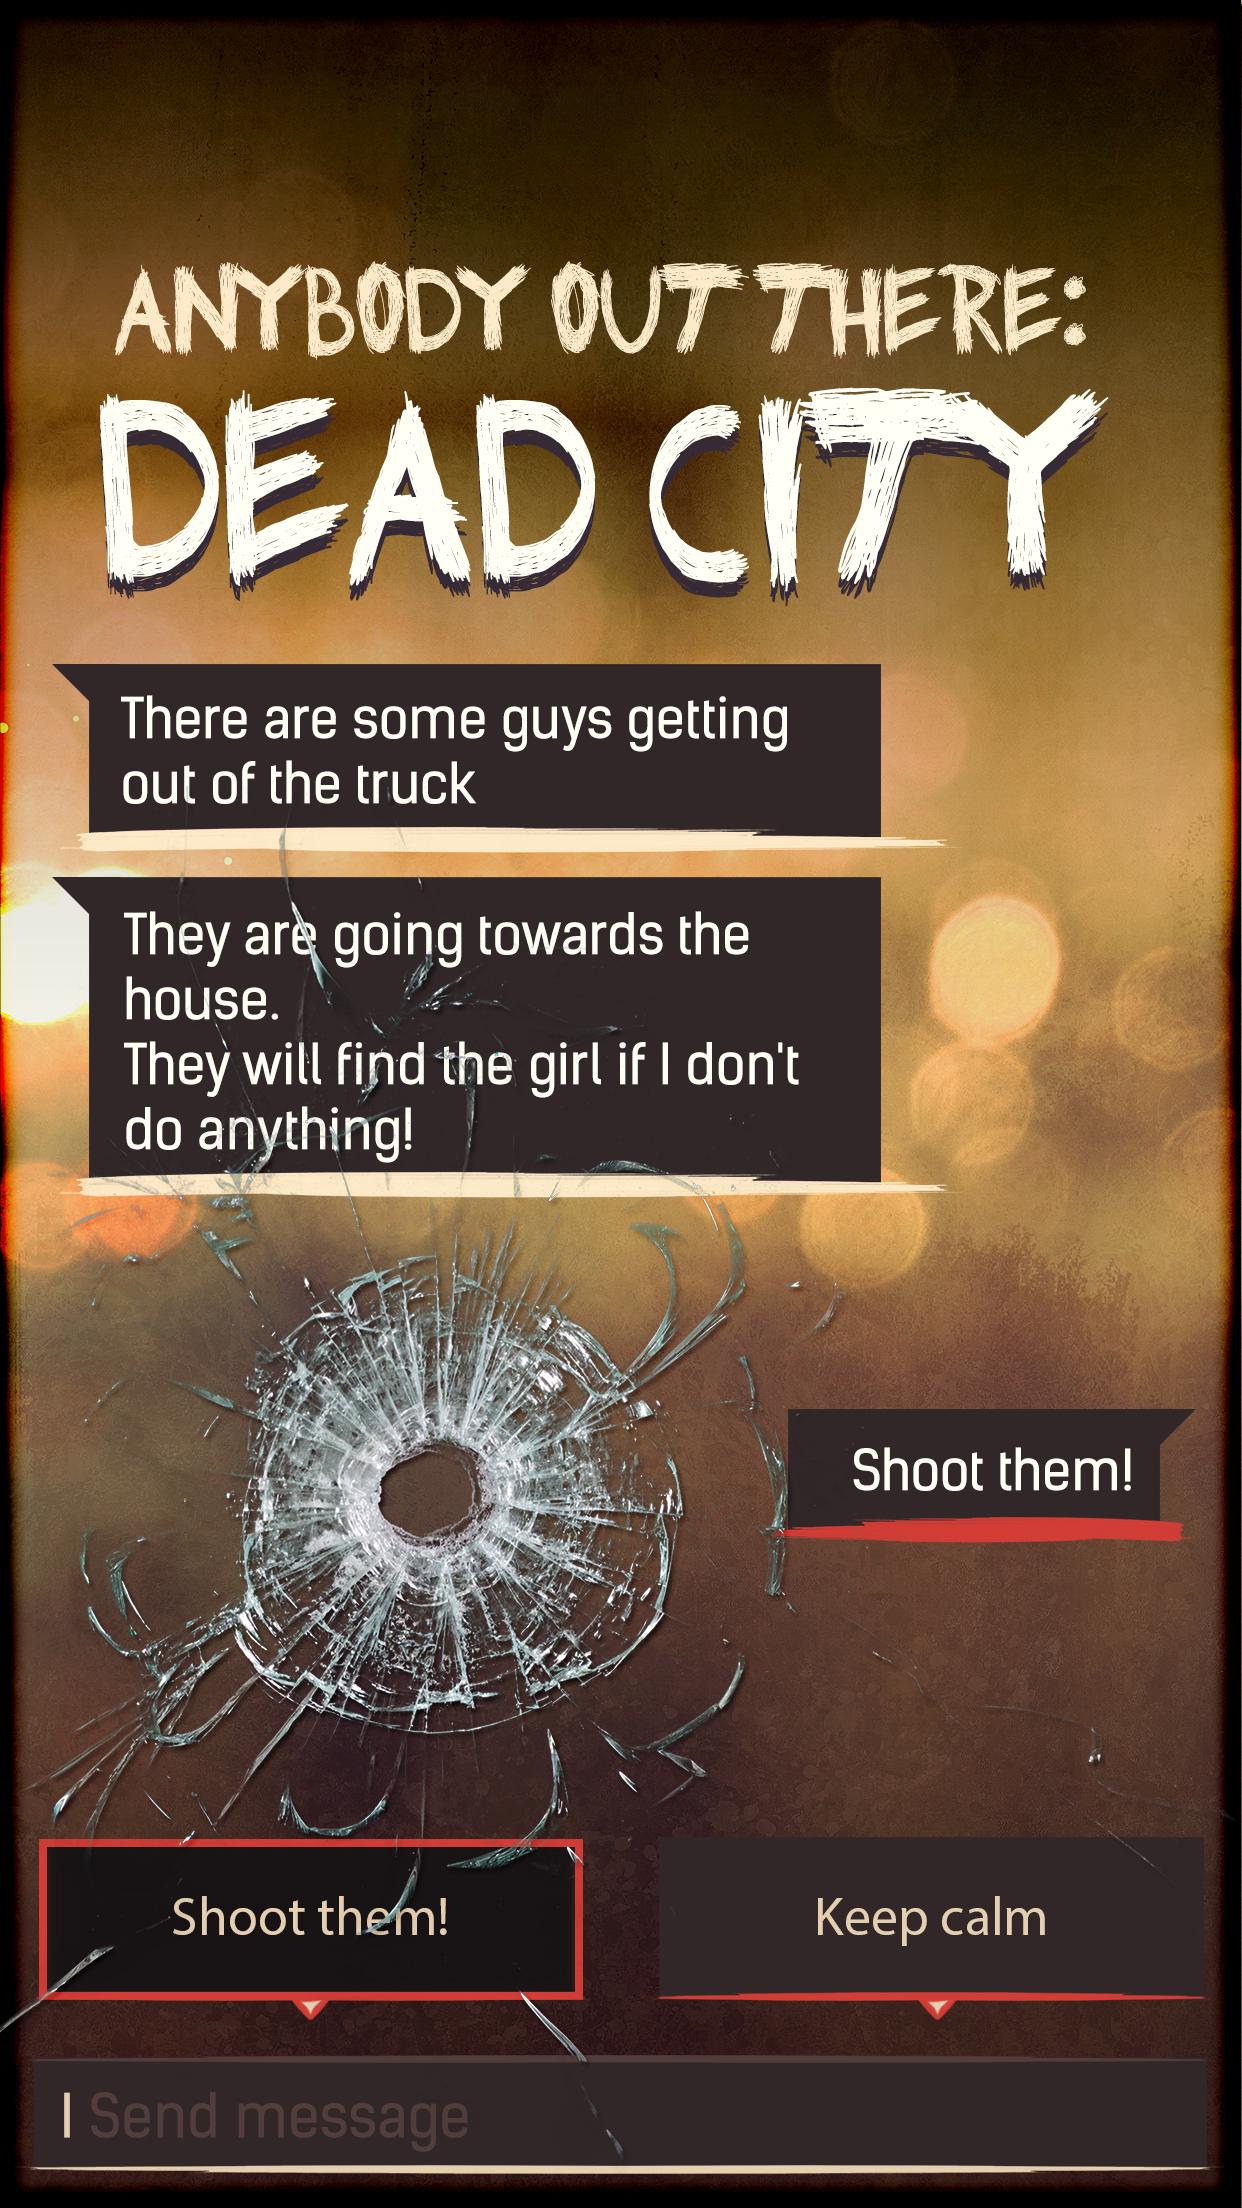 Android application DEAD CITY - Choose Your Story screenshort